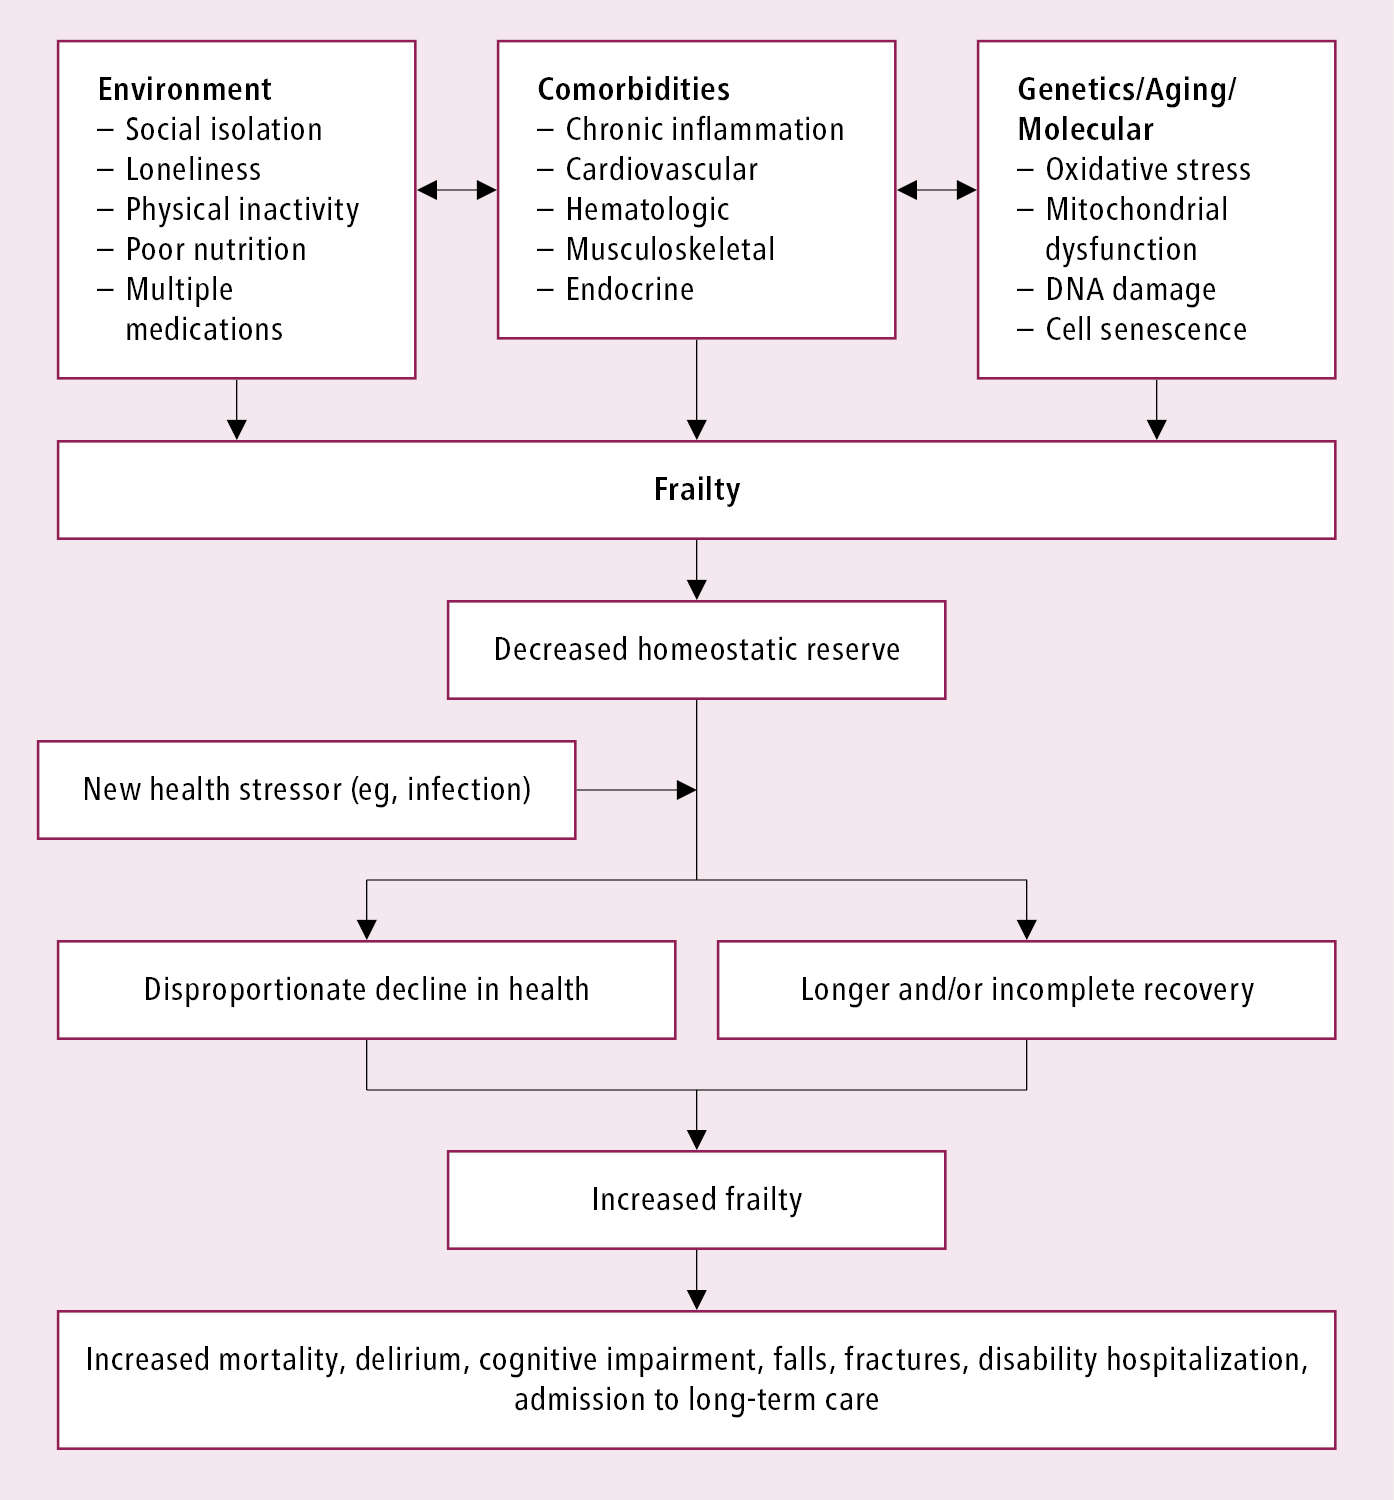 Figure 031_9199.  Pathophysiology of frailty.  Adapted from    Lancet. 2013;381:752-762  . 